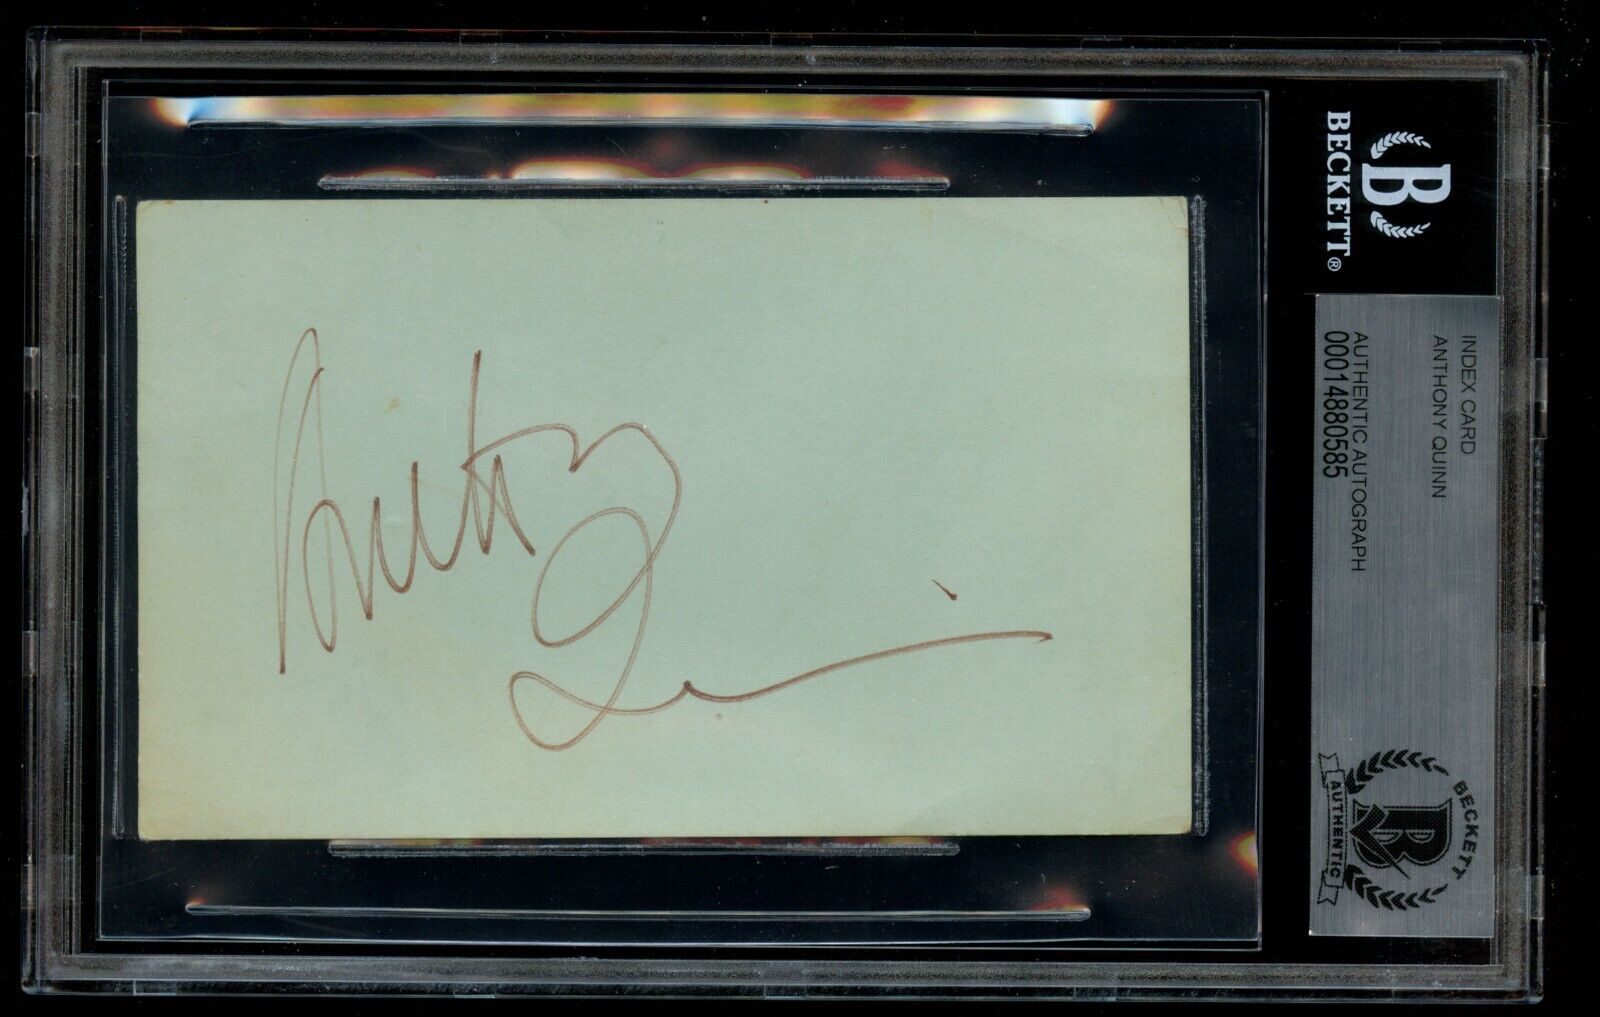 Anthony Quinn d2001 signed autograph 3x5 index card Actor Lawrence of Arabia BAS